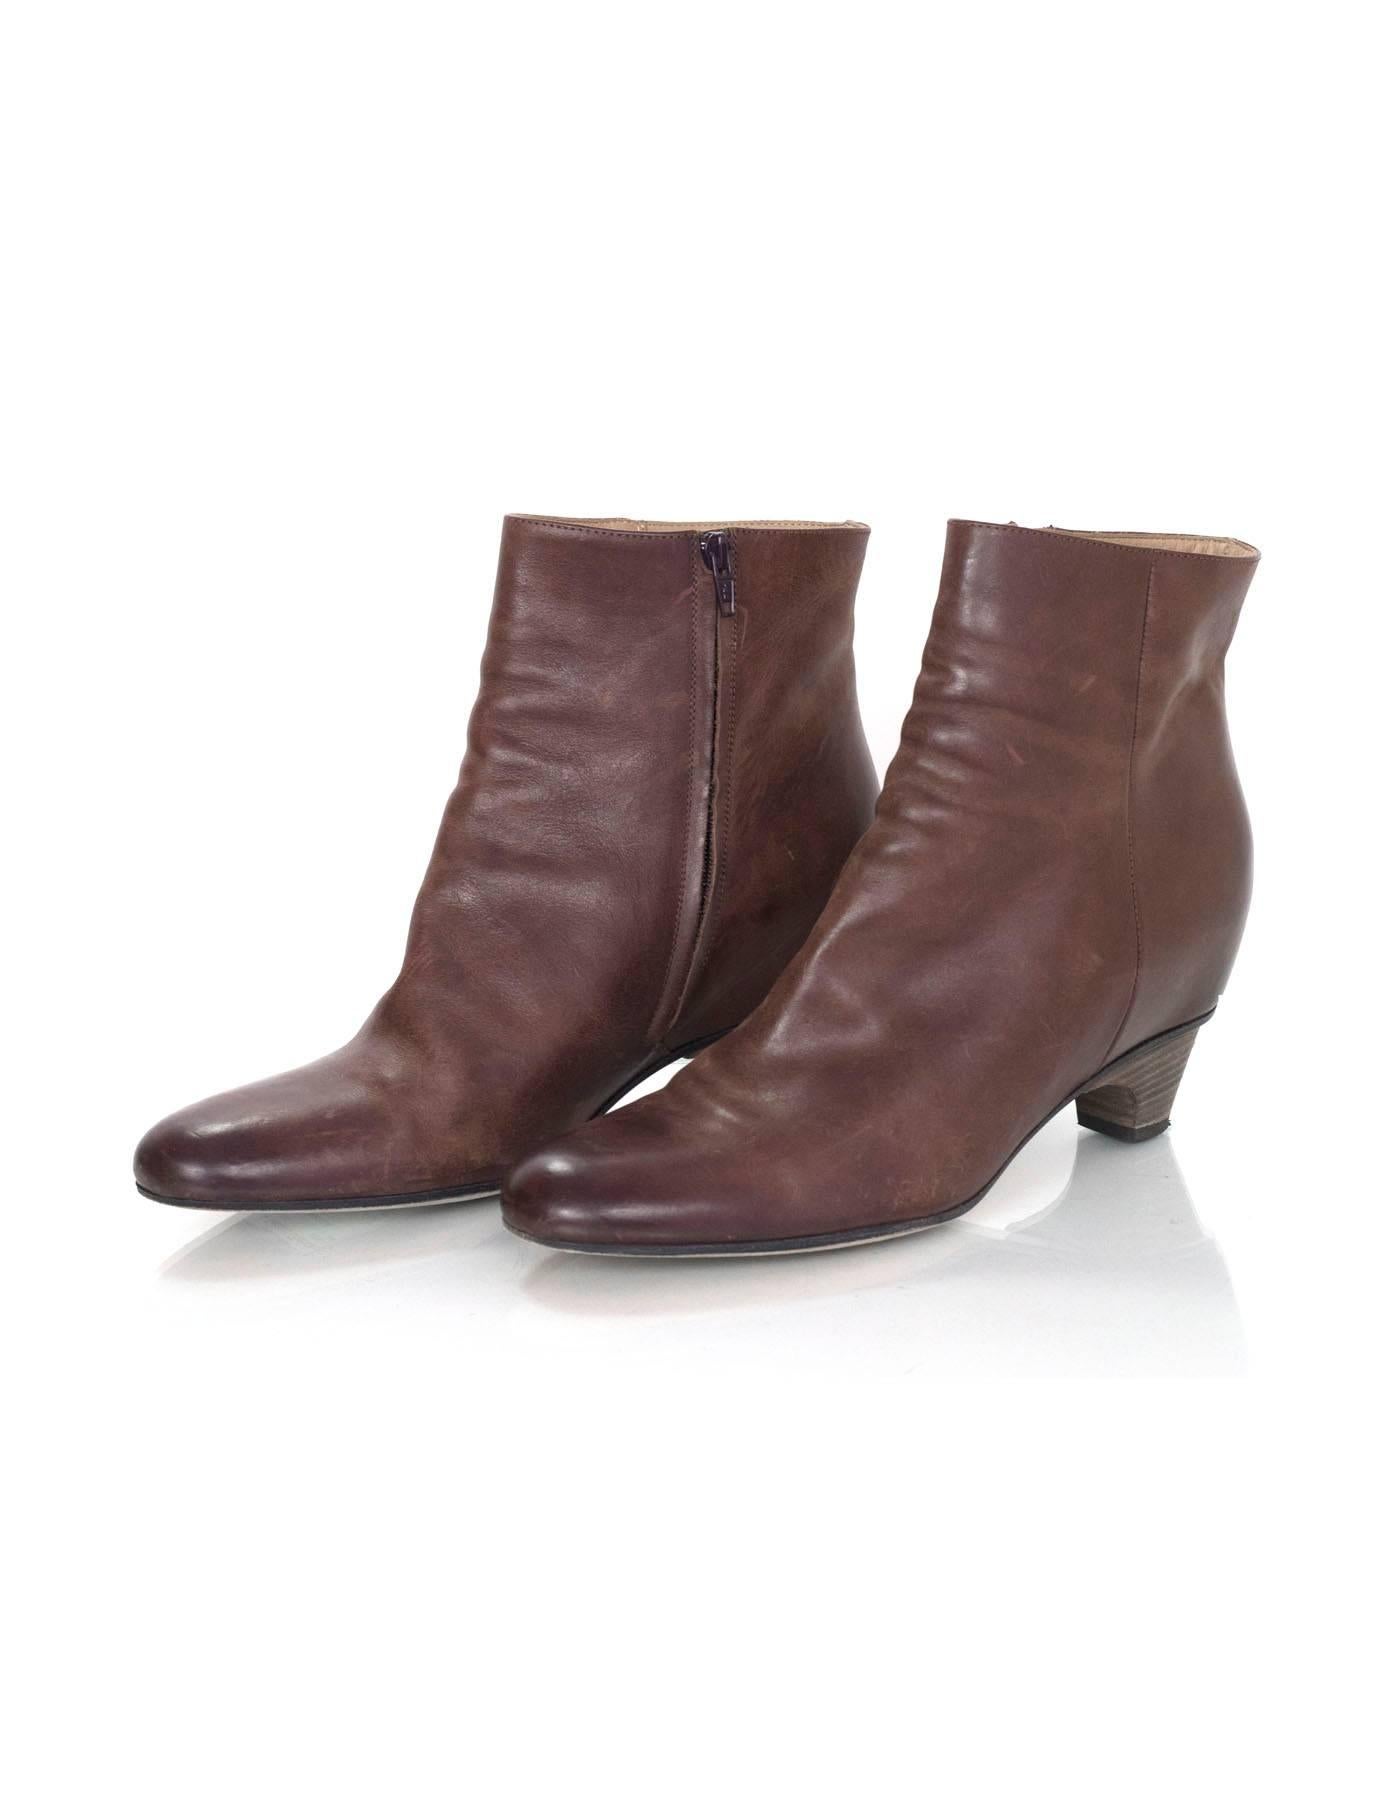 Maison Martin Margiela Brown Leather Ankle Boots Sz 39.5 with Box In Good Condition In New York, NY